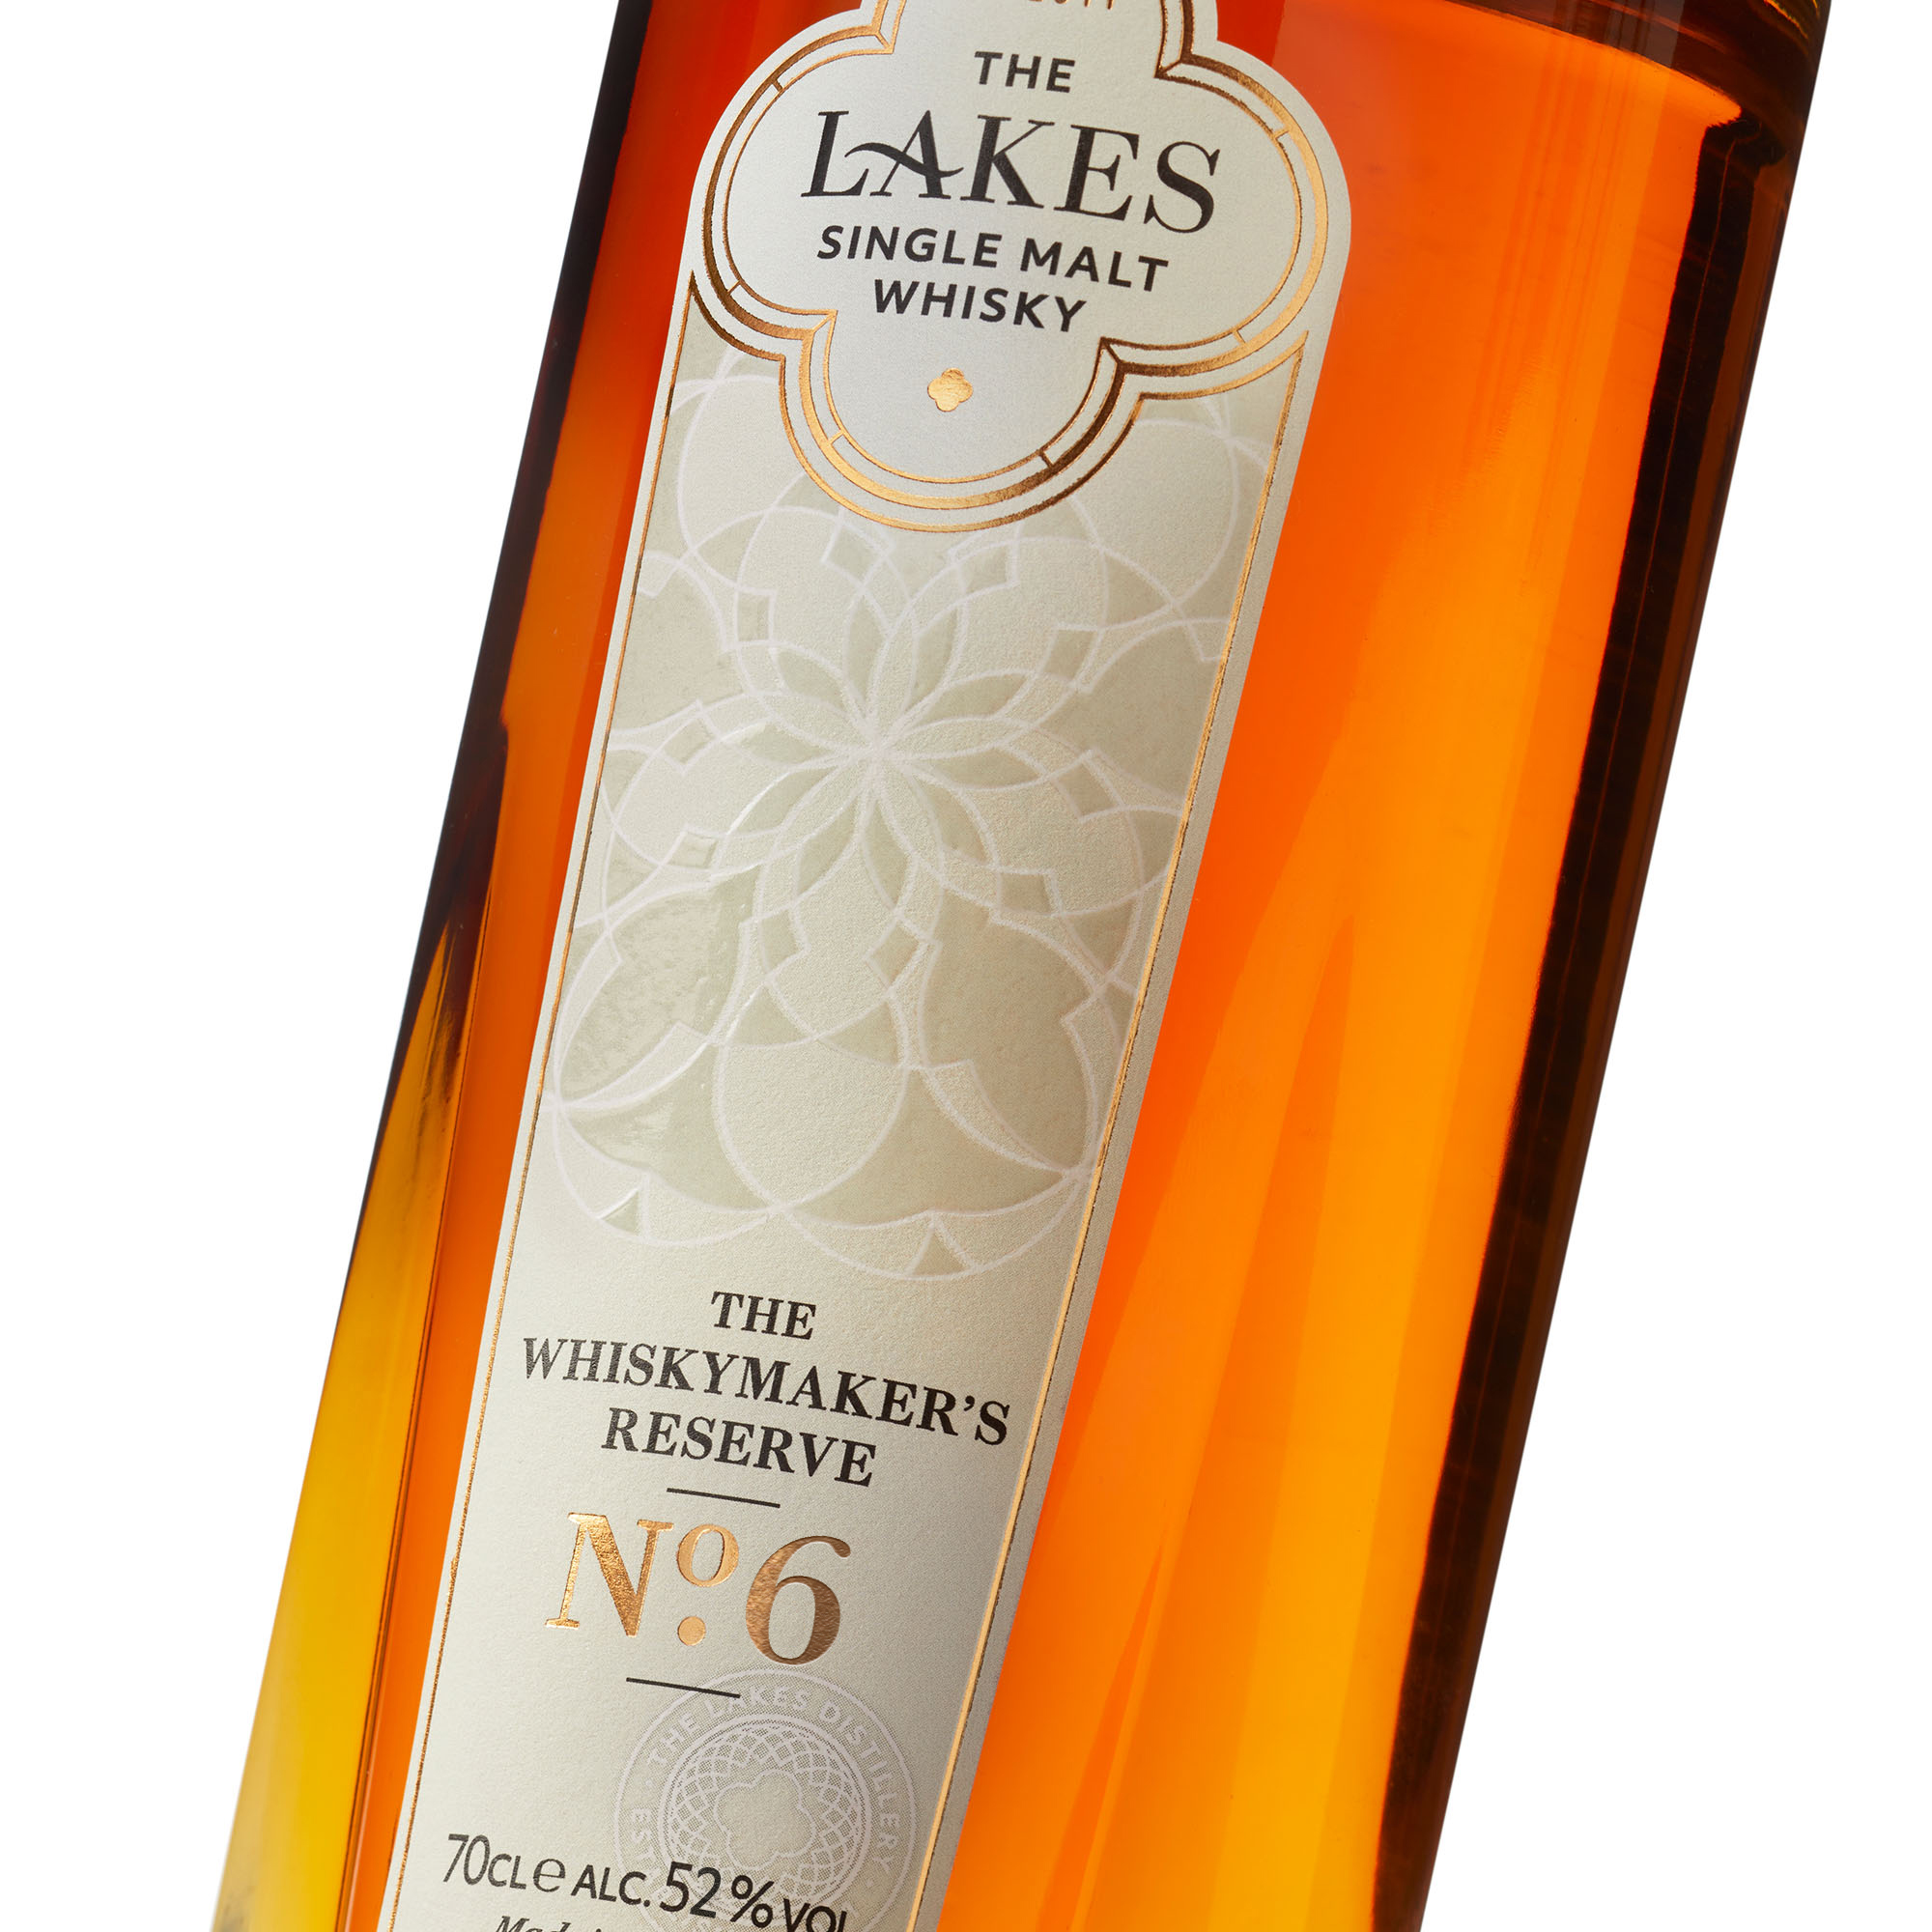 The Lakes Single Malt Whisky The Whiskymaker's Reserve No. 6